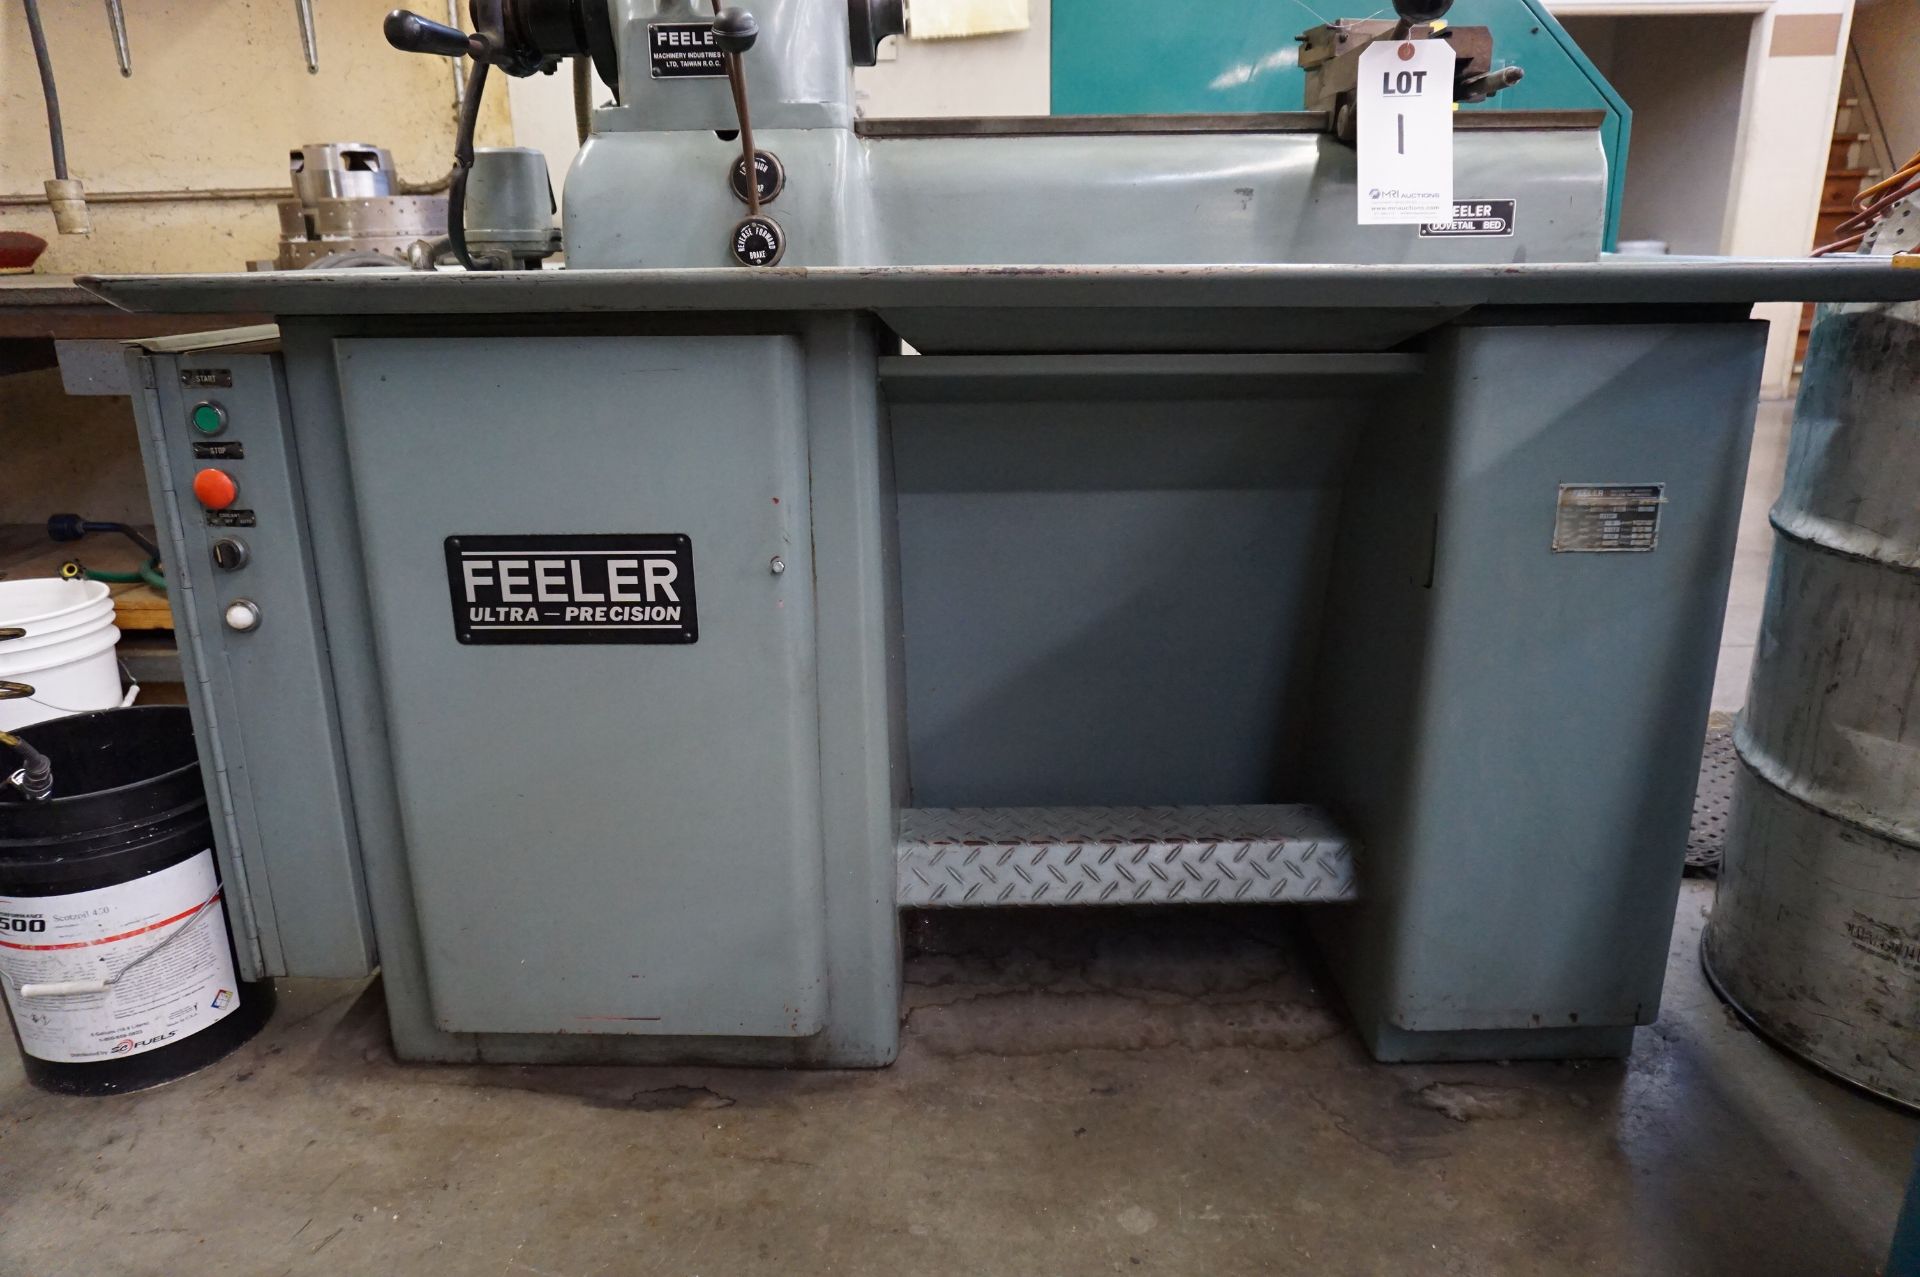 1980 FEELER FSM-59 PRECISION LATHE, S/N 690937, SWING OVER BED 9”, BED LENGTH 36” - Image 3 of 6